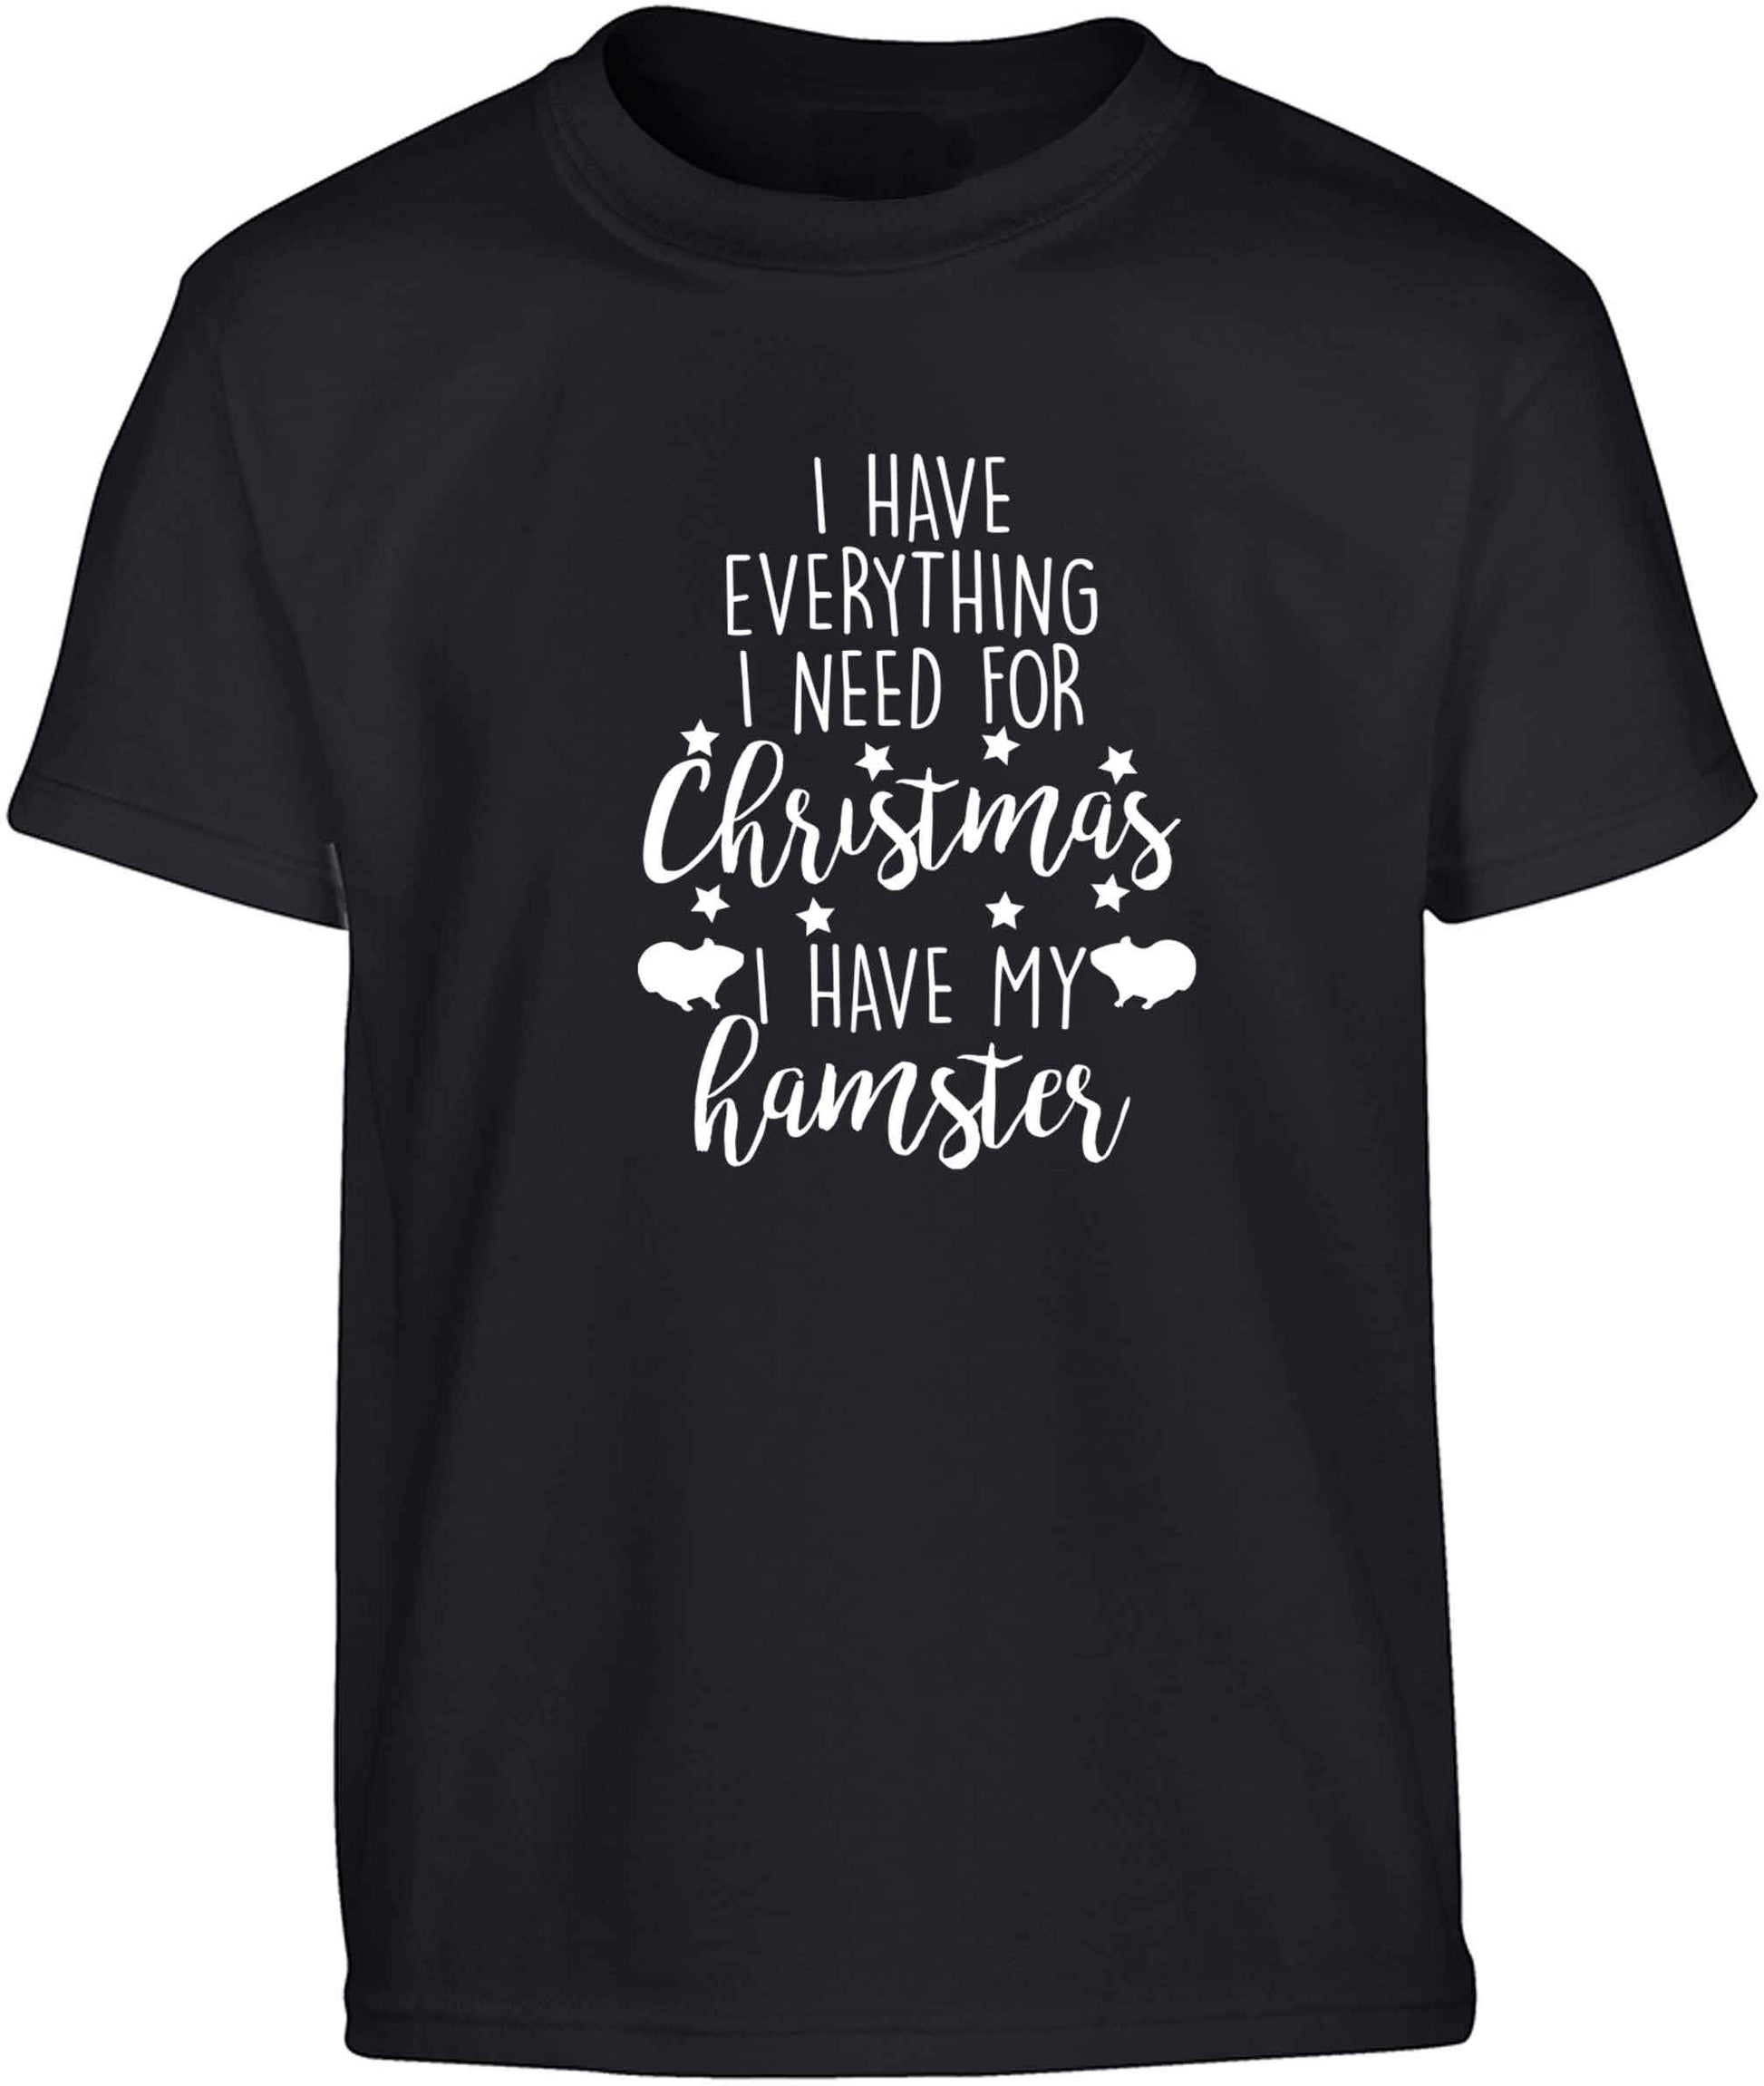 I have everything I need for Christmas I have my hamster Children's black Tshirt 12-13 Years